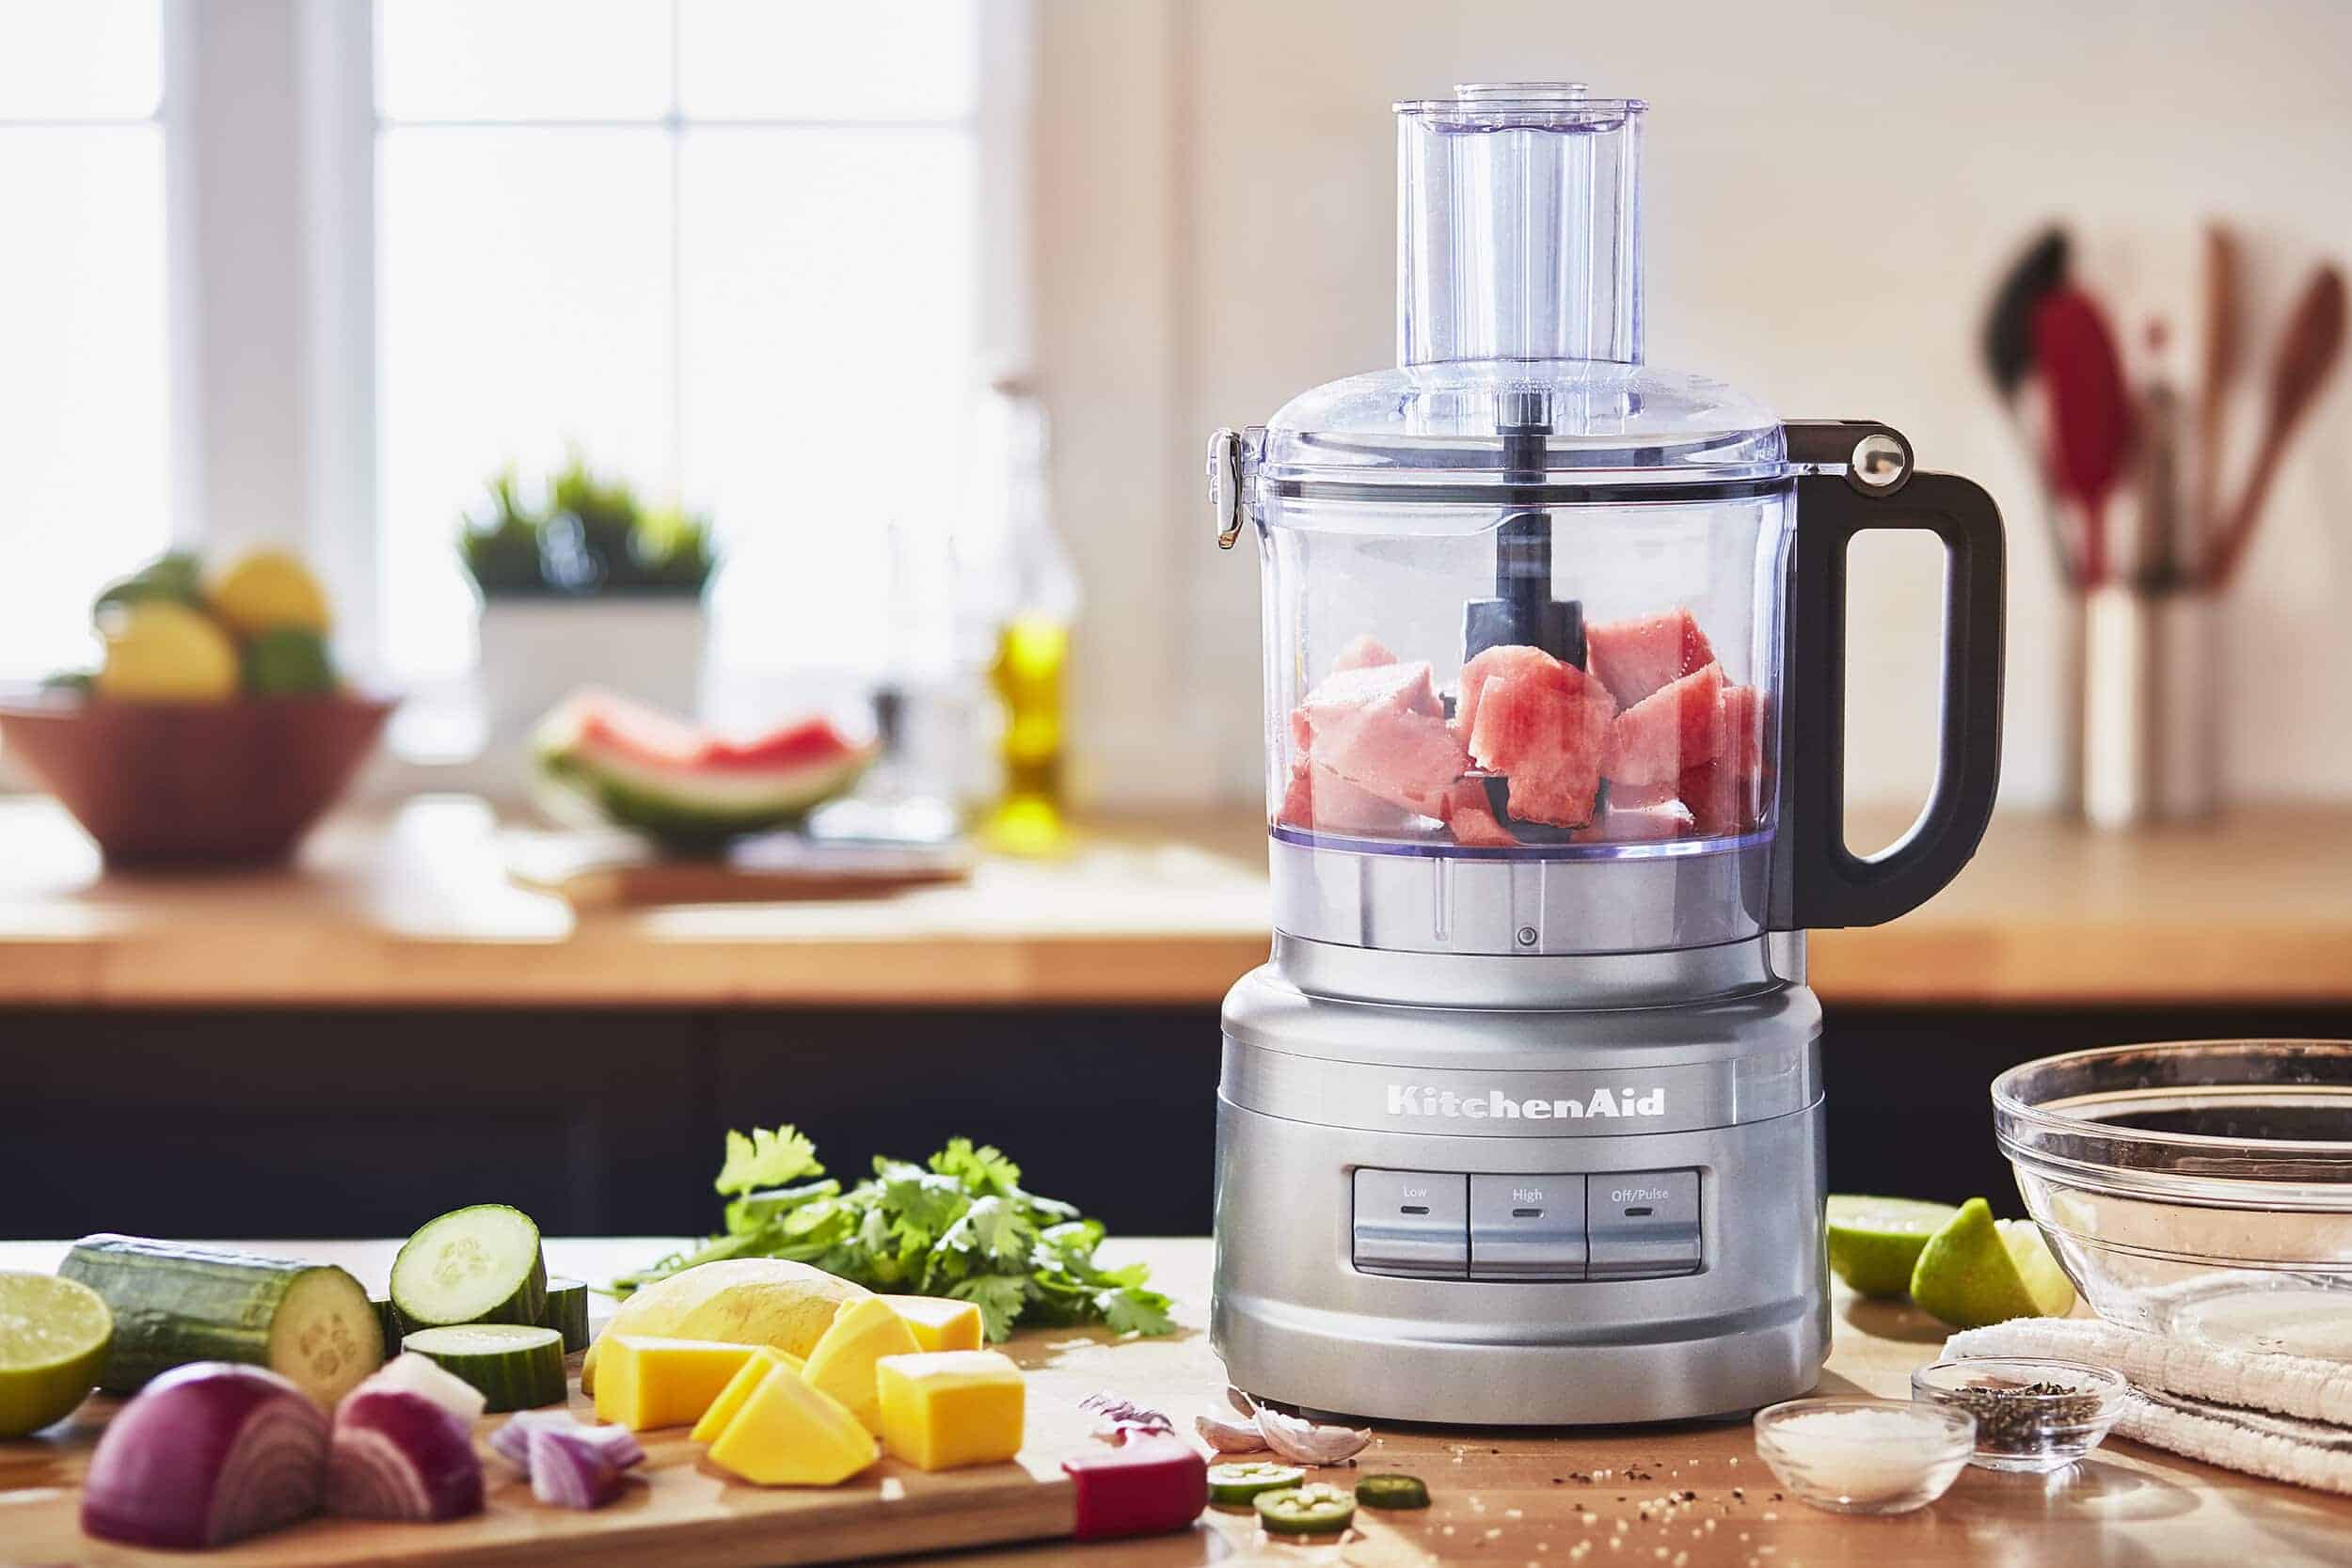 What to make with a food processor?